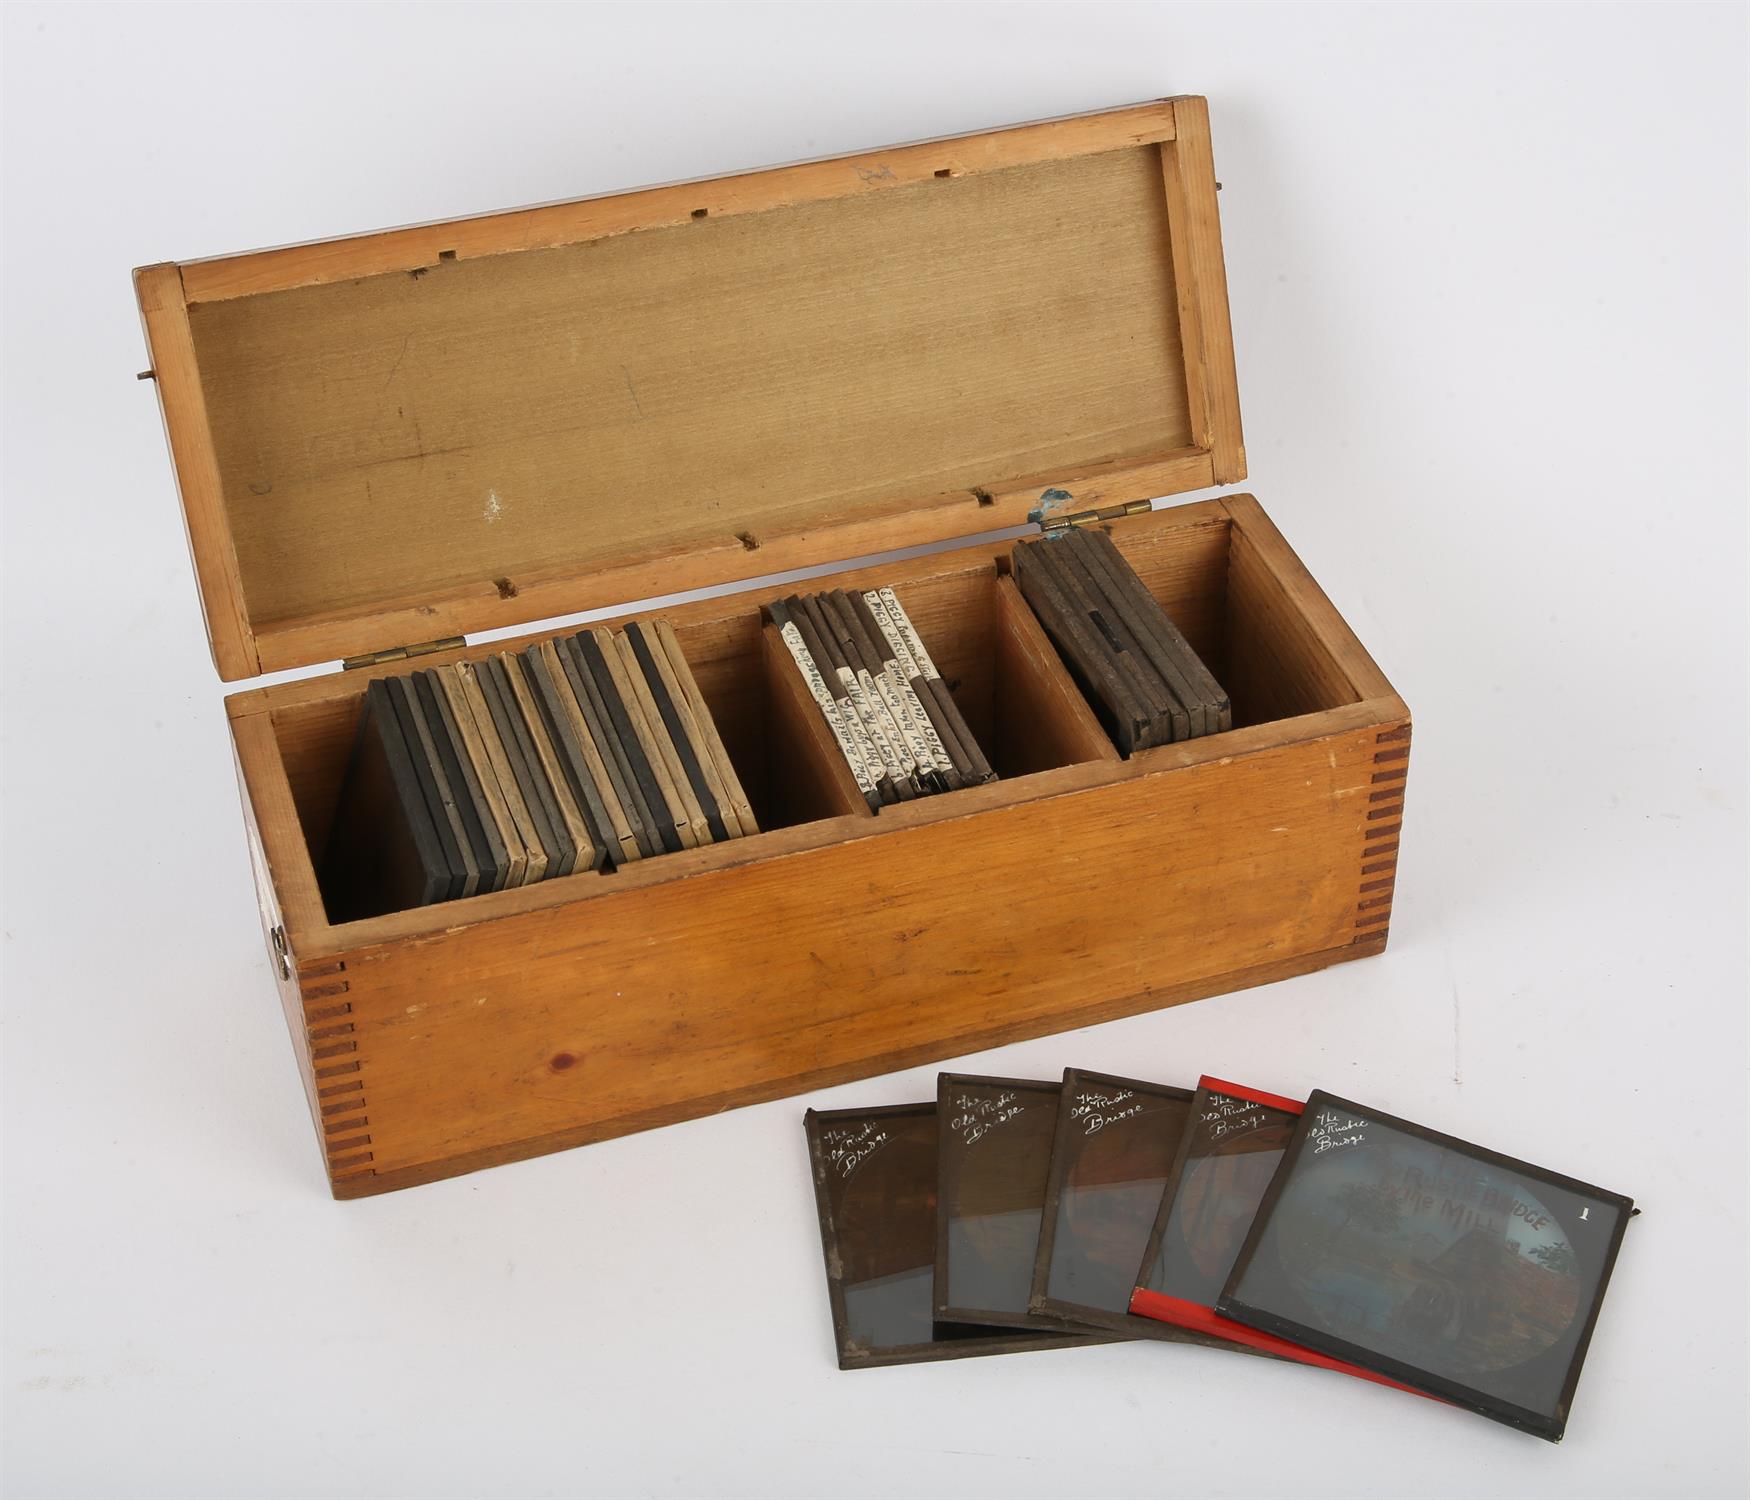 Collection of 41 Magic Lantern slides including 7 slides of 'Little Red Riding Hood', - Image 2 of 2